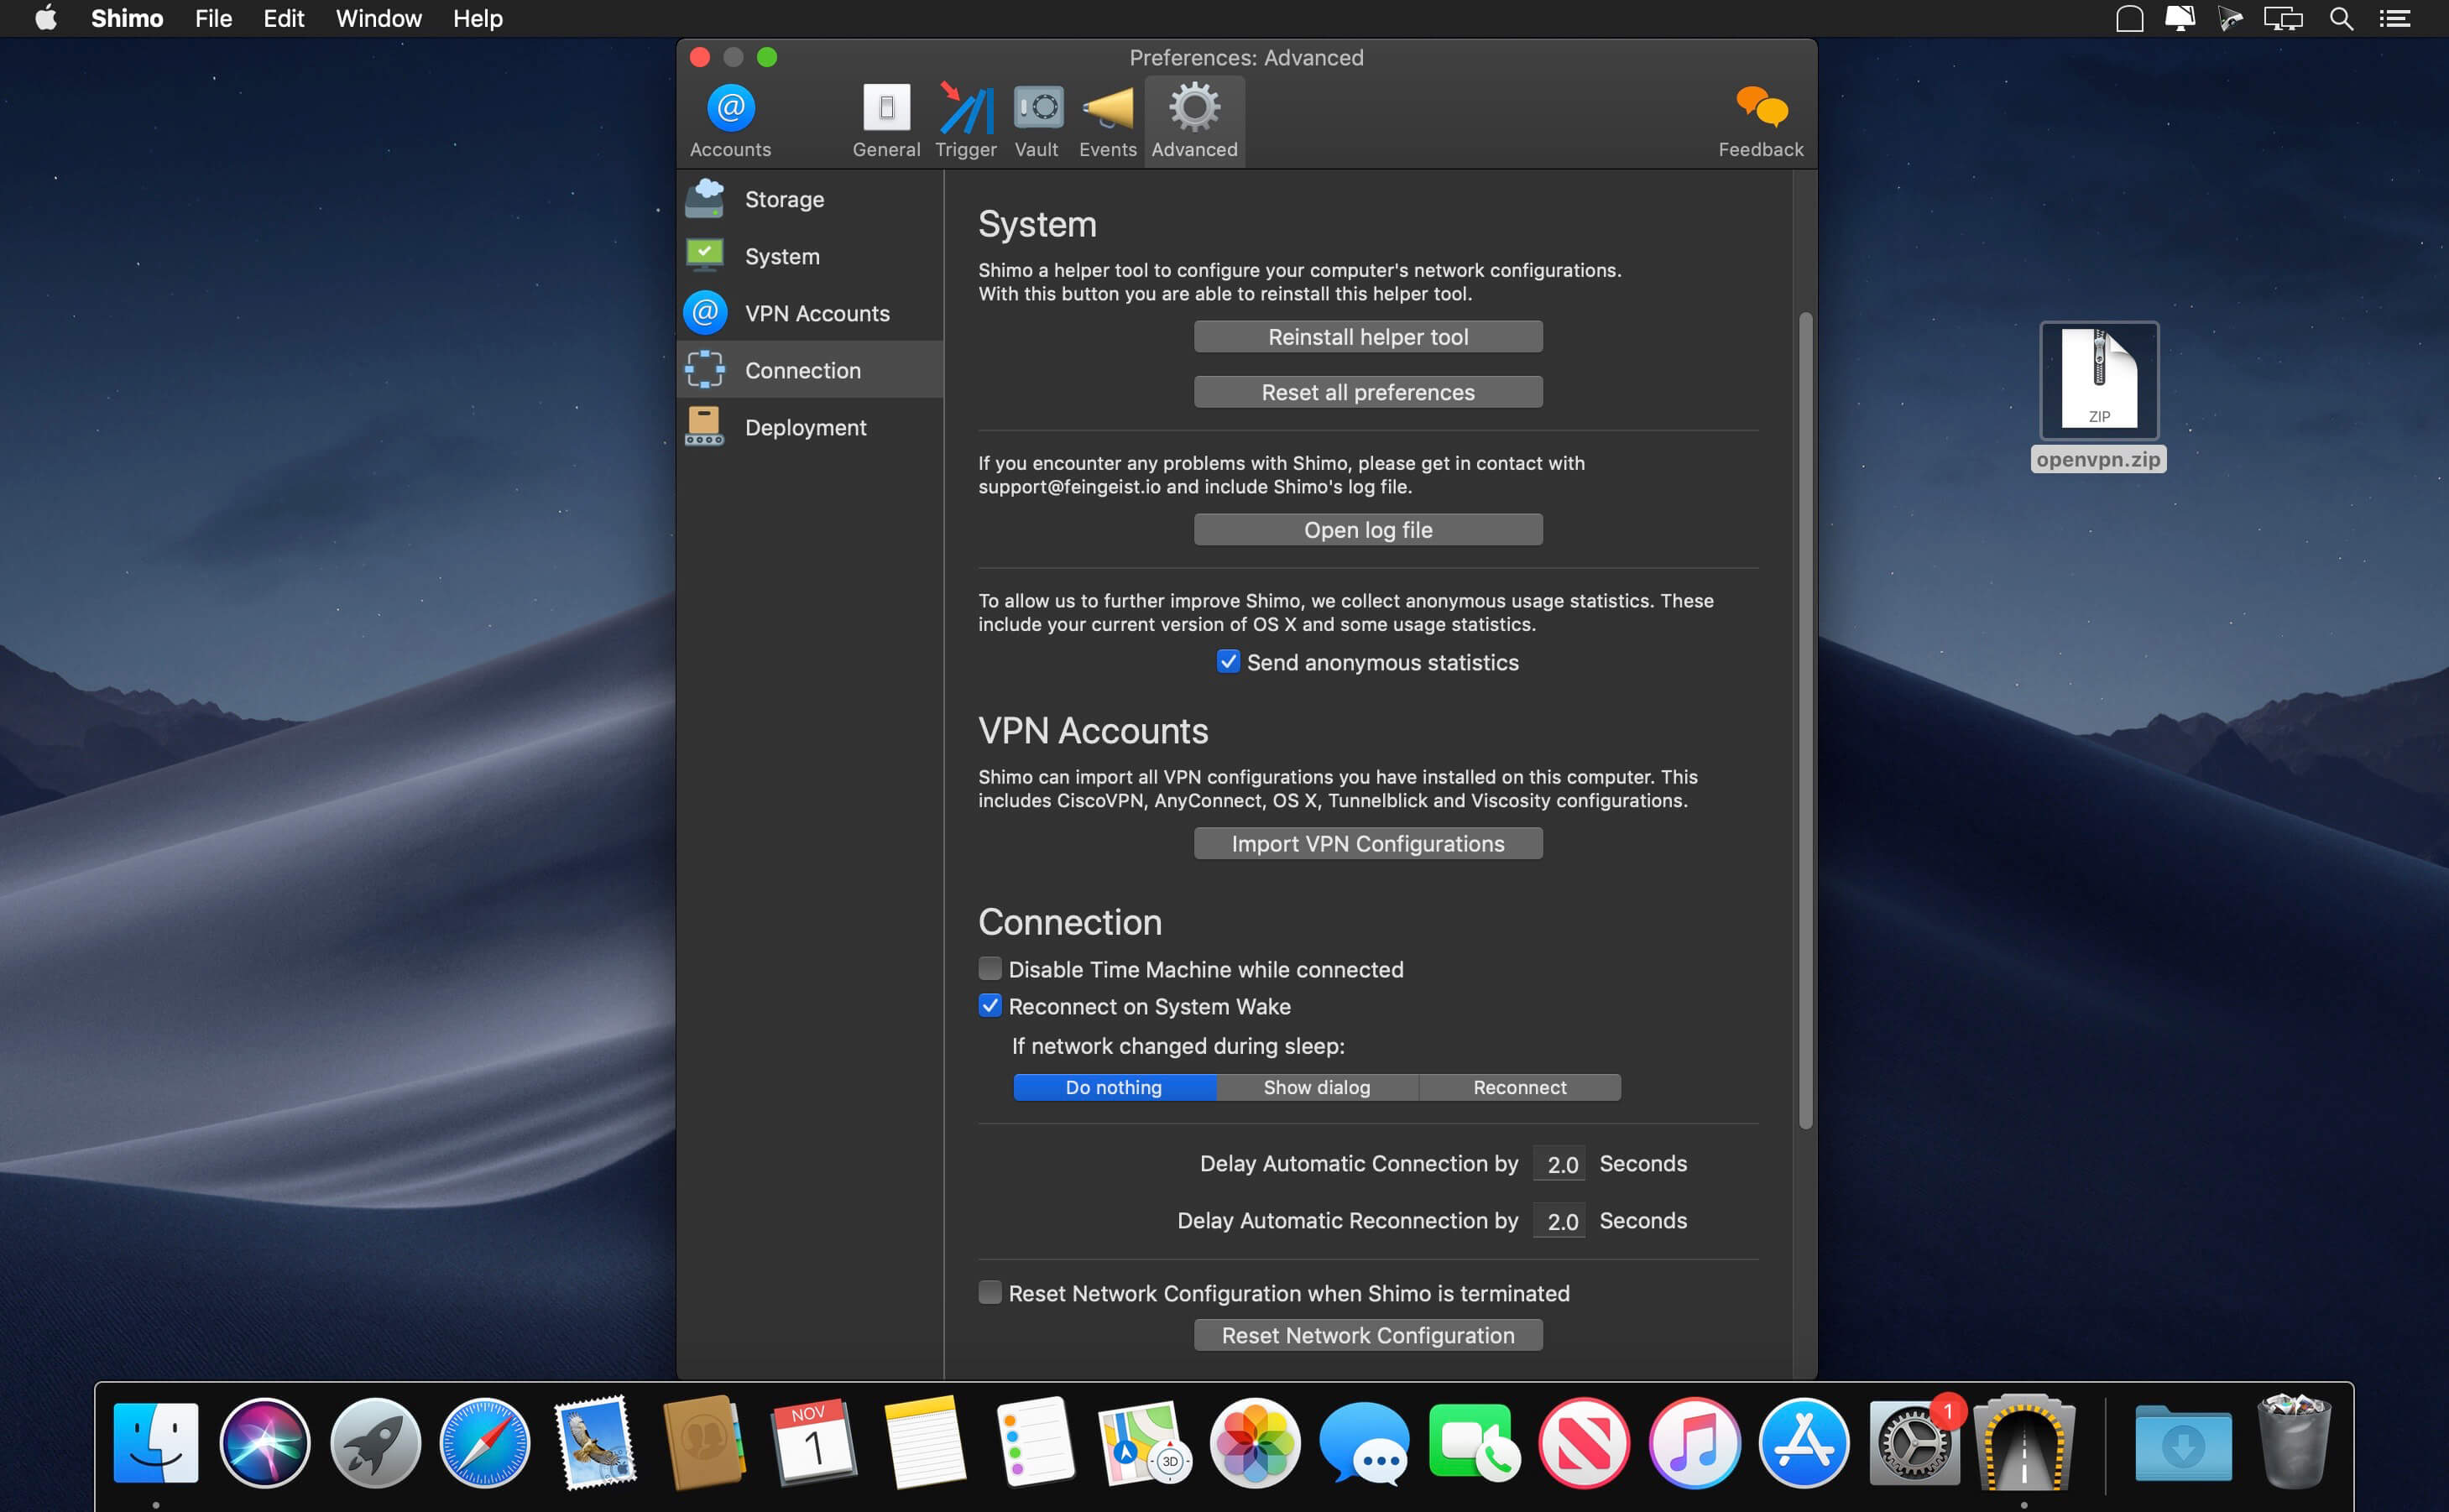 free cleaner for mac 10.7.5